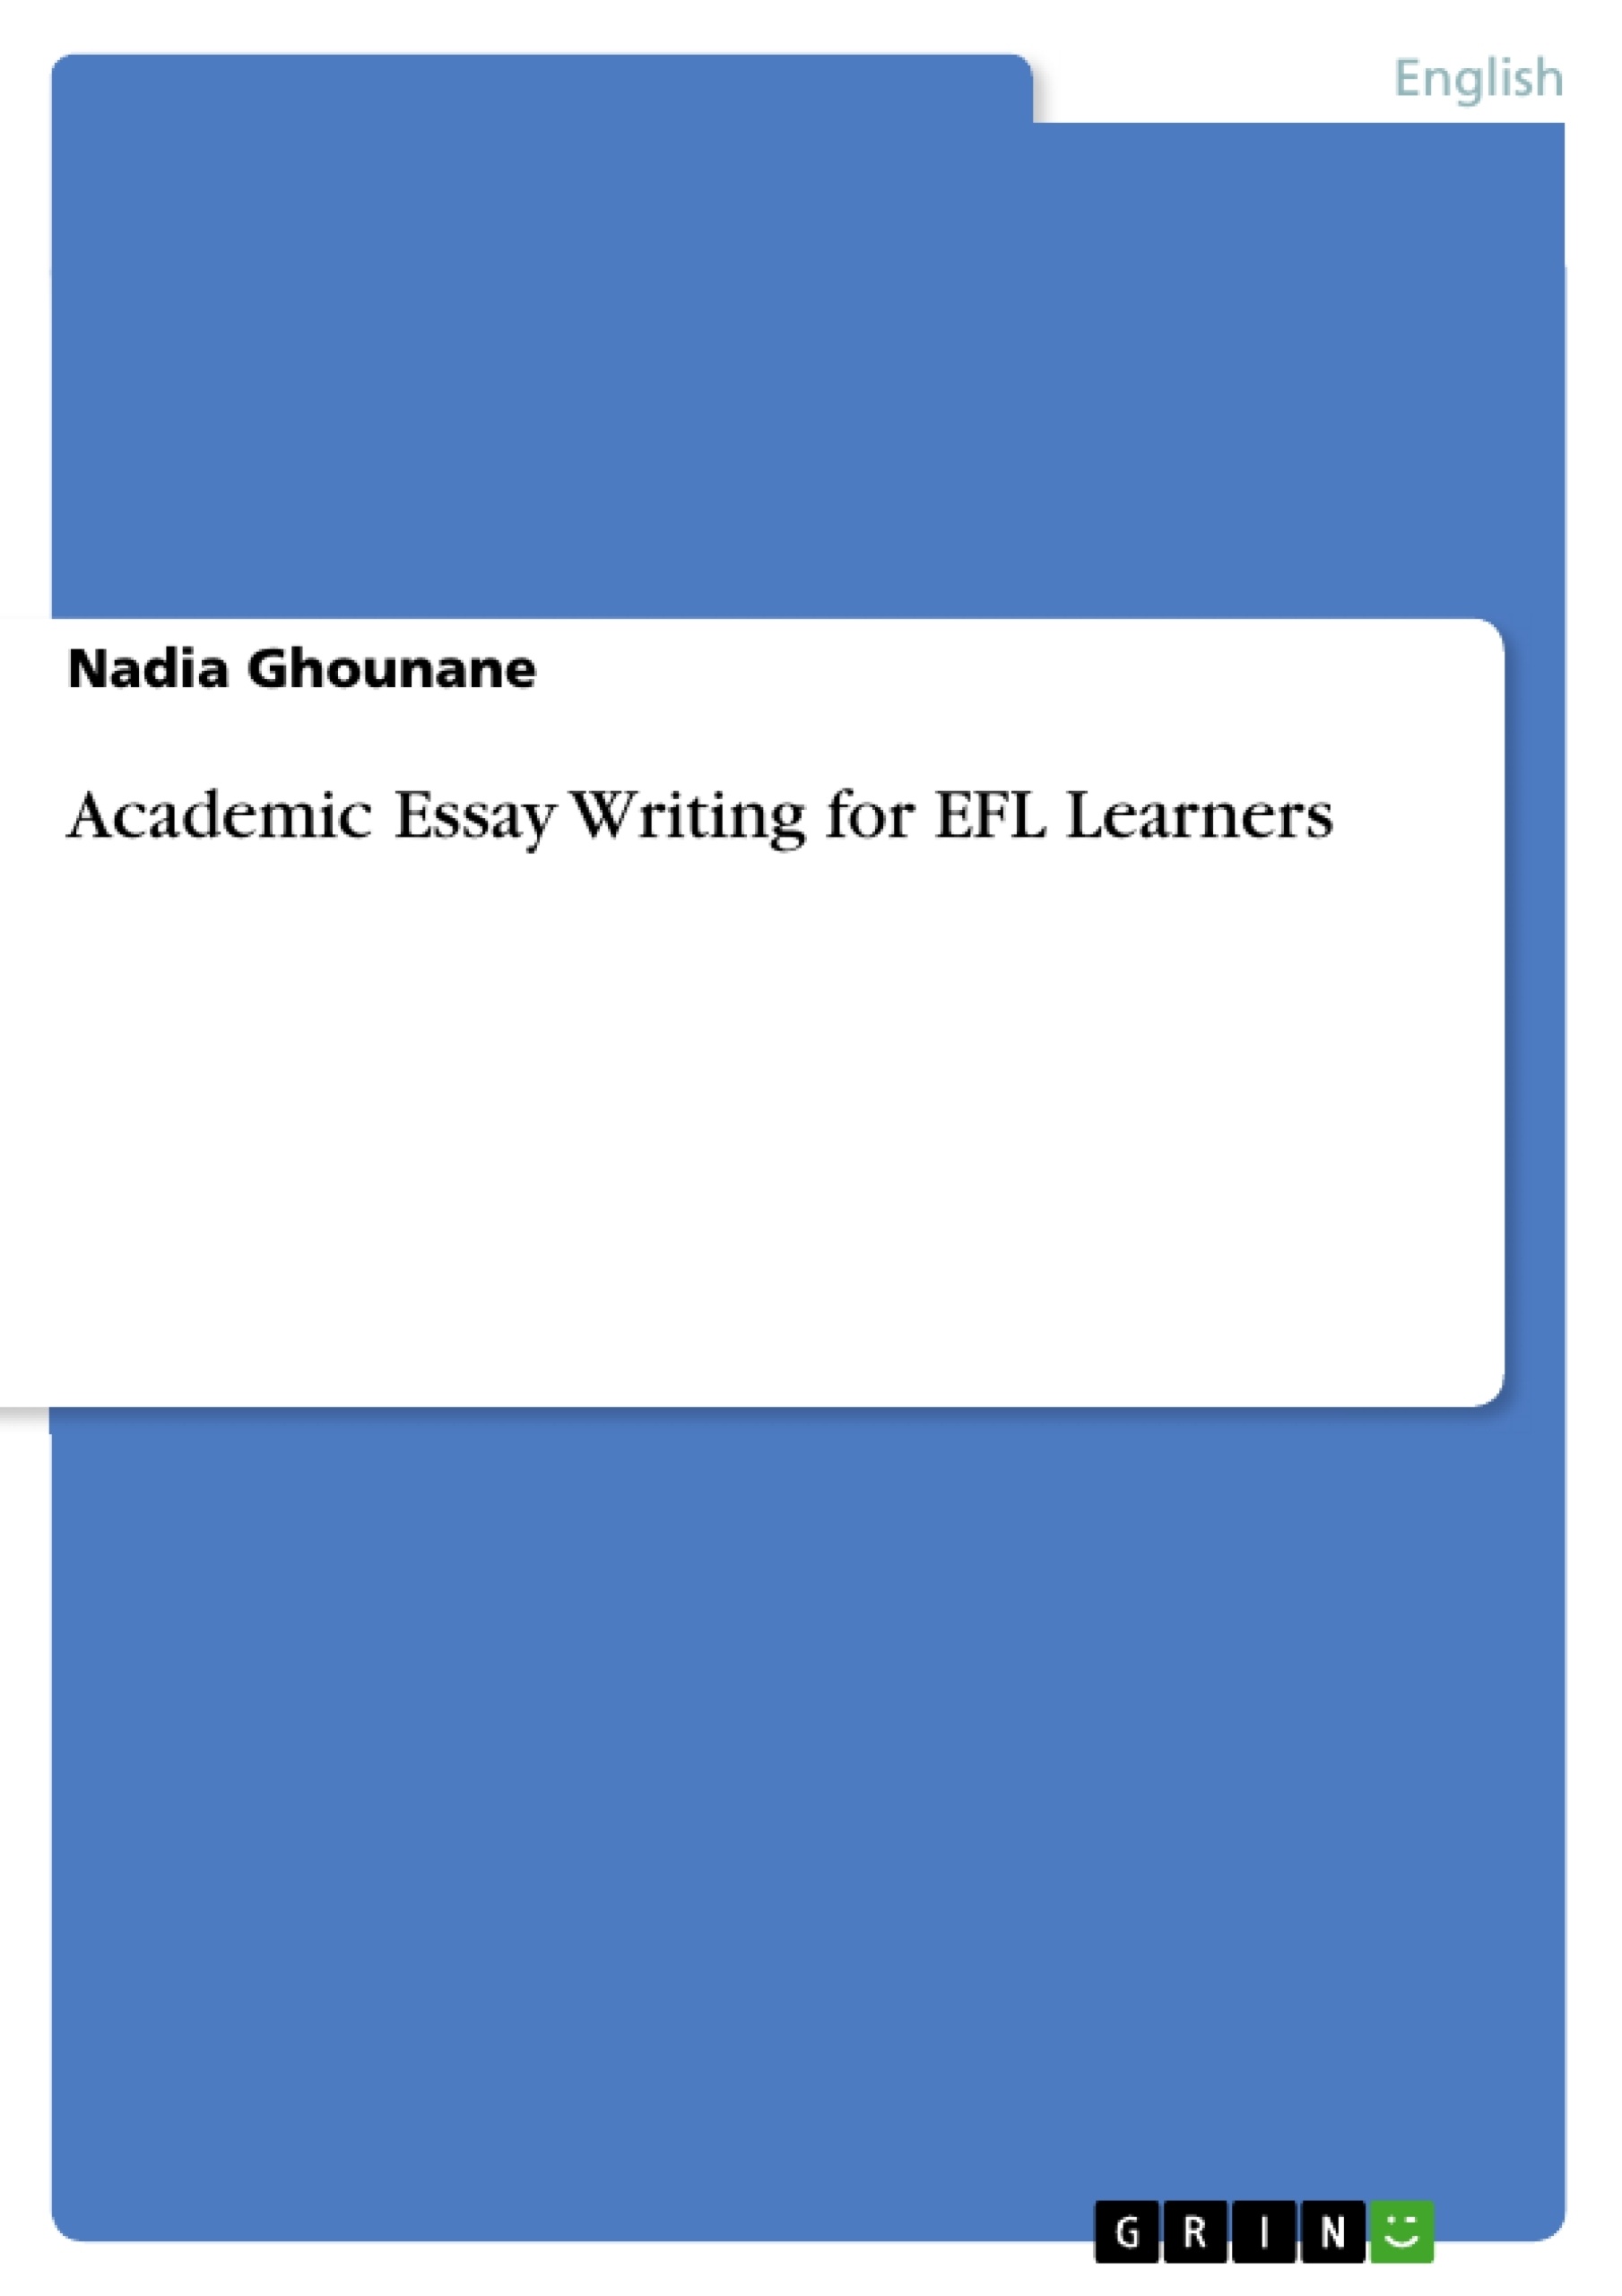 Title: Academic Essay Writing for EFL Learners